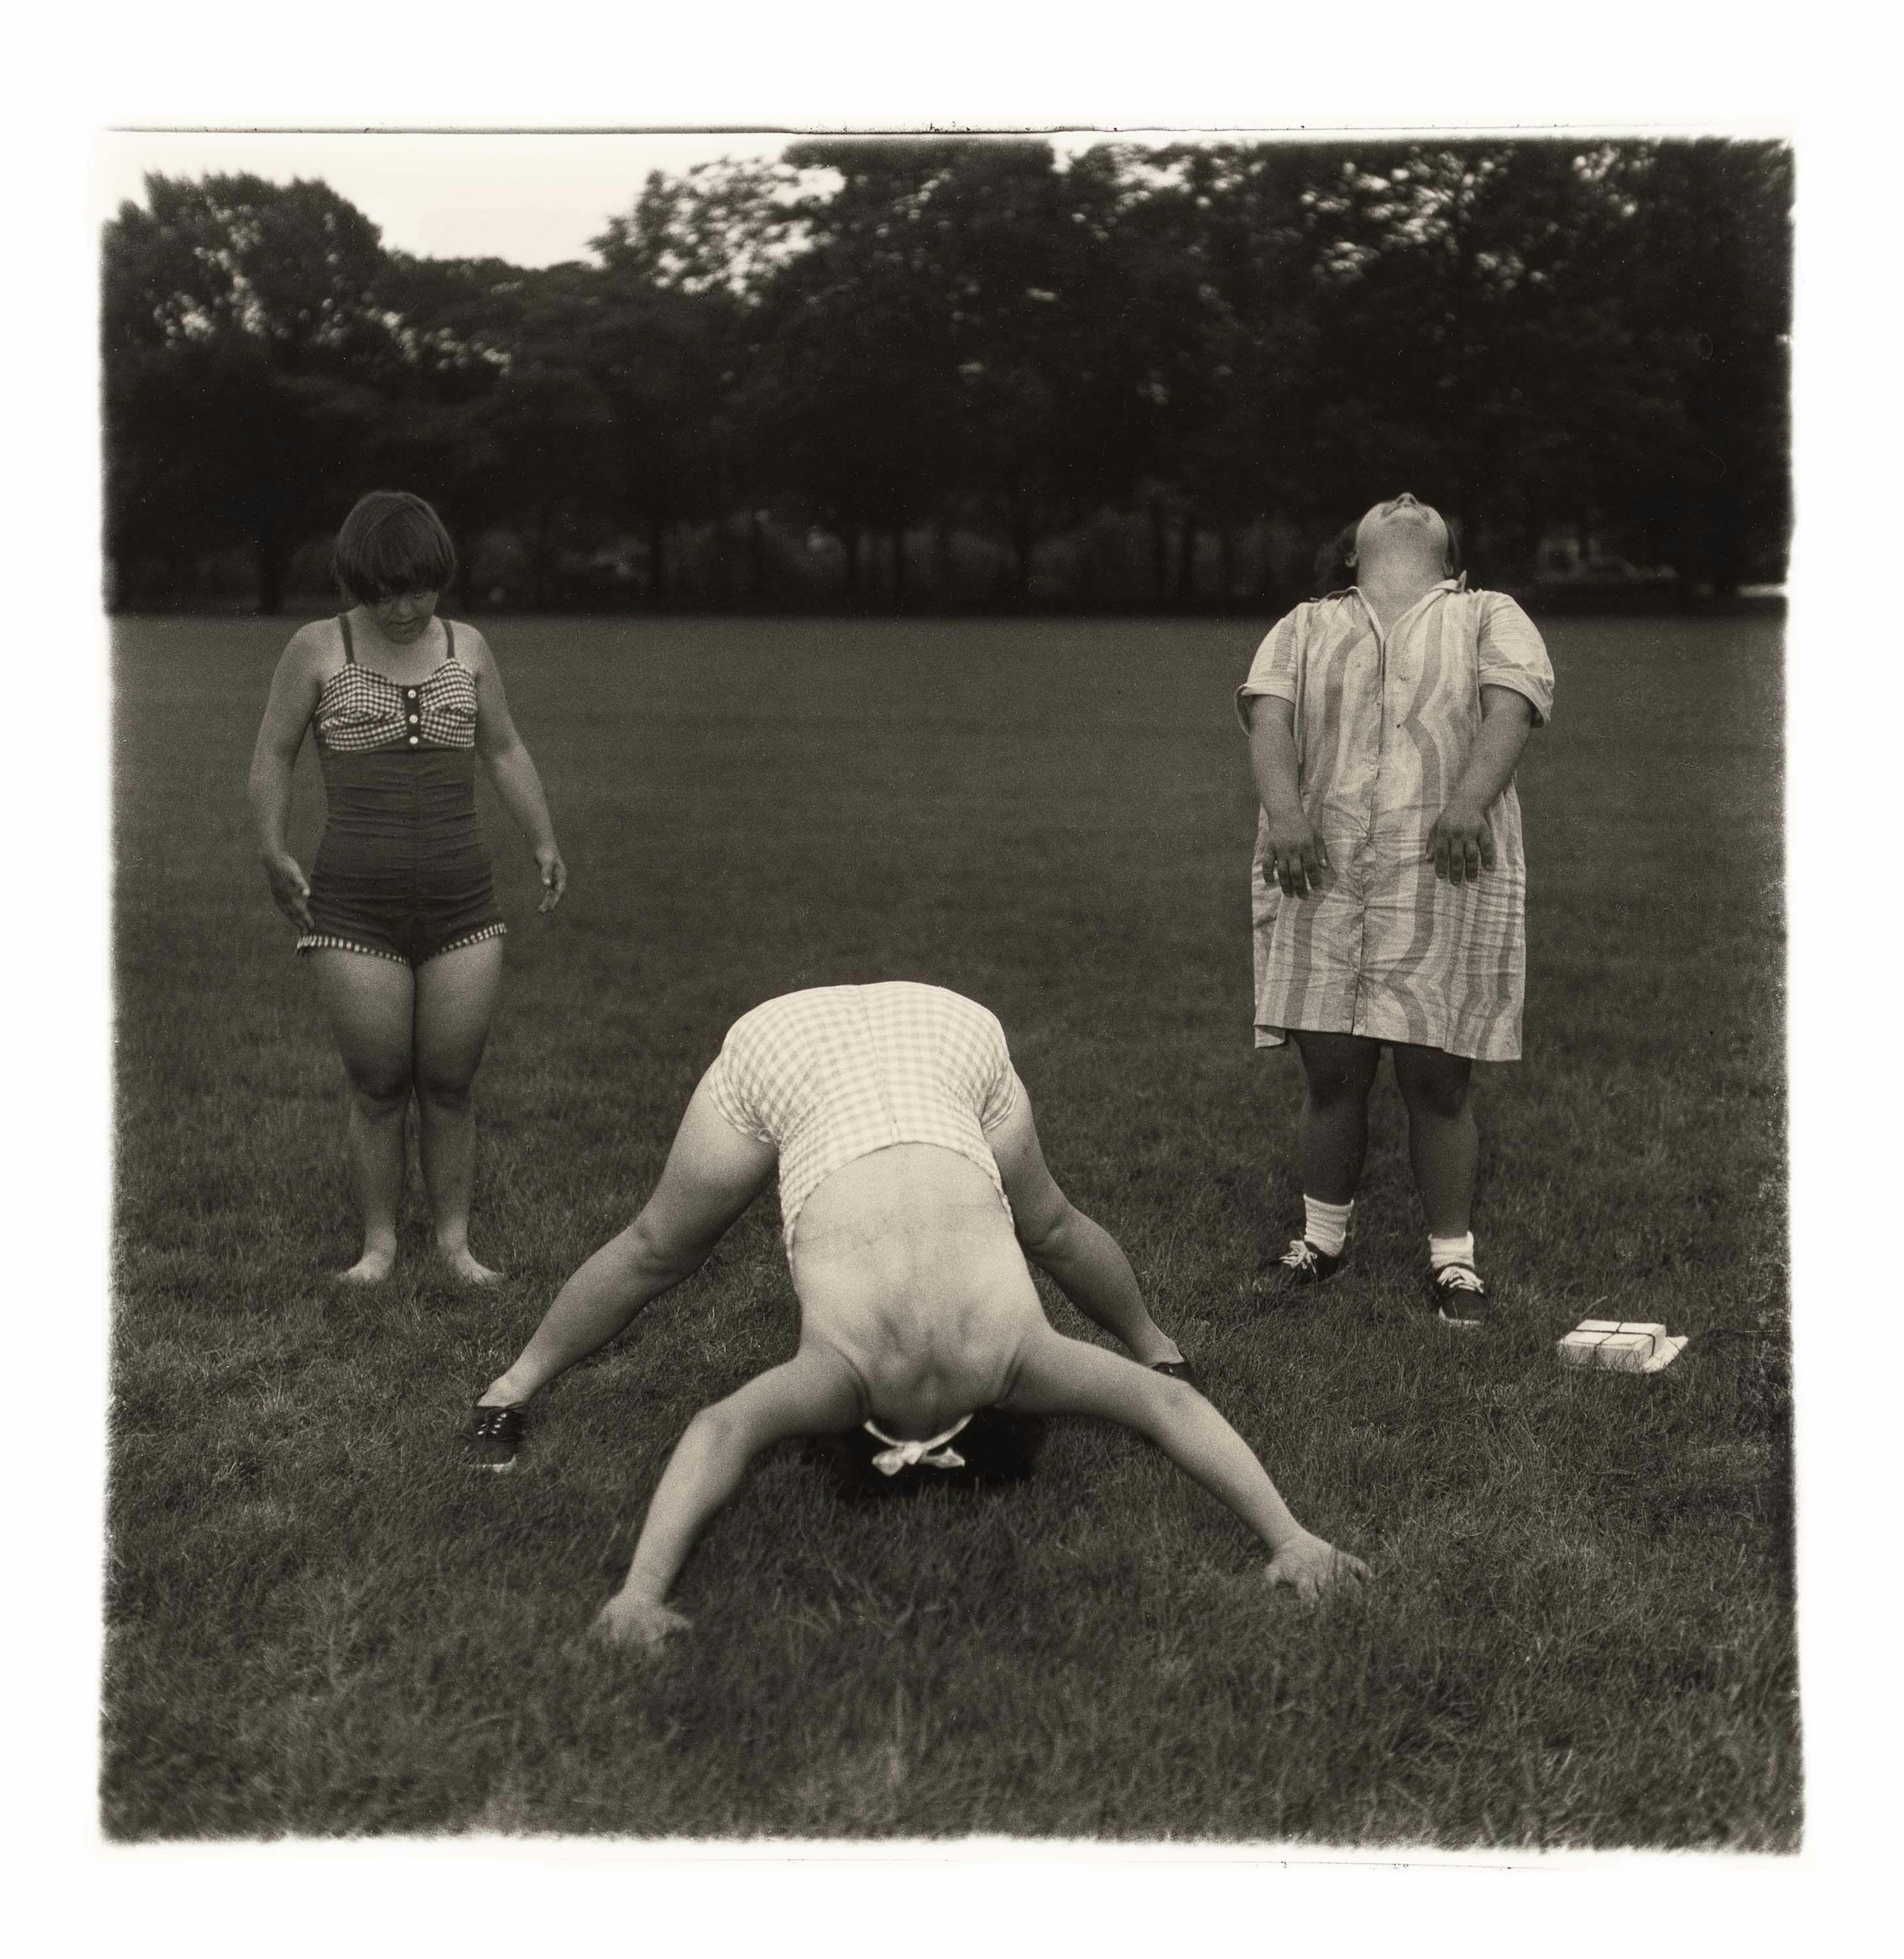 A gelatin silver print by Diane Arbus, titled Untitled (6) 1970-71, dated 1970-1971.